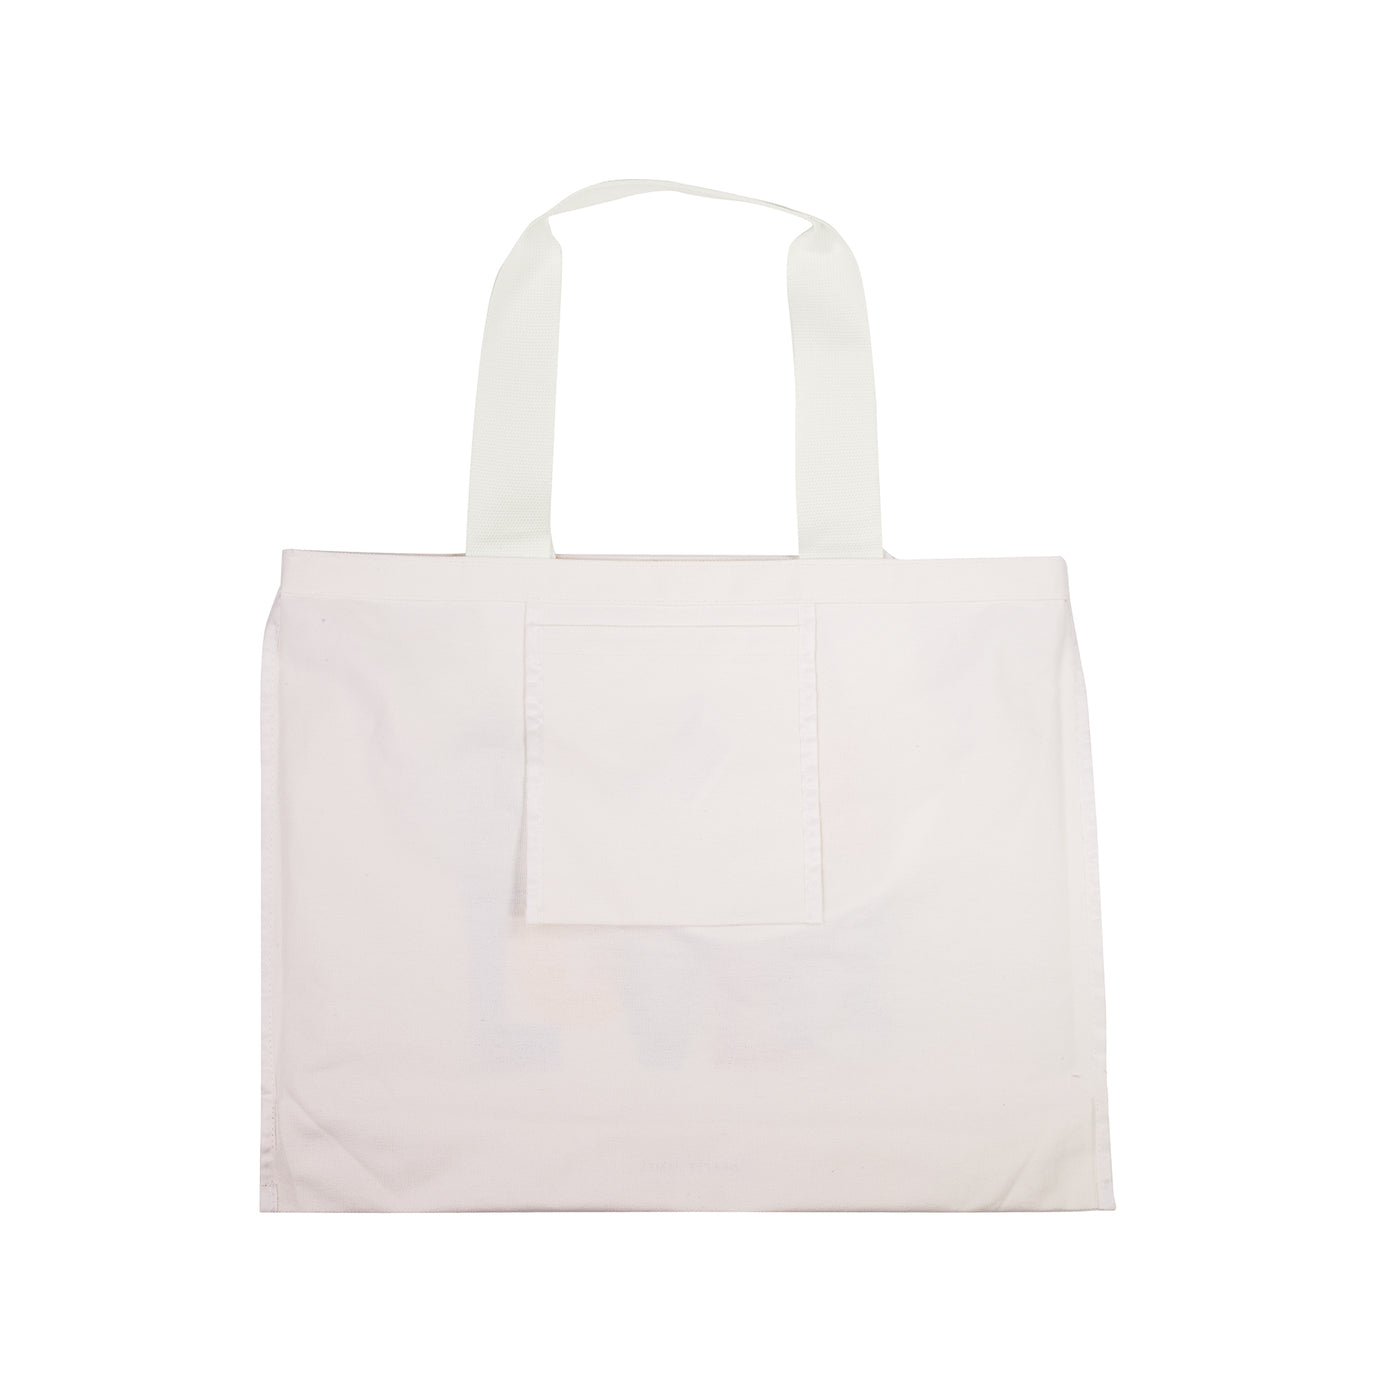 Book Lovers Canvas Tote